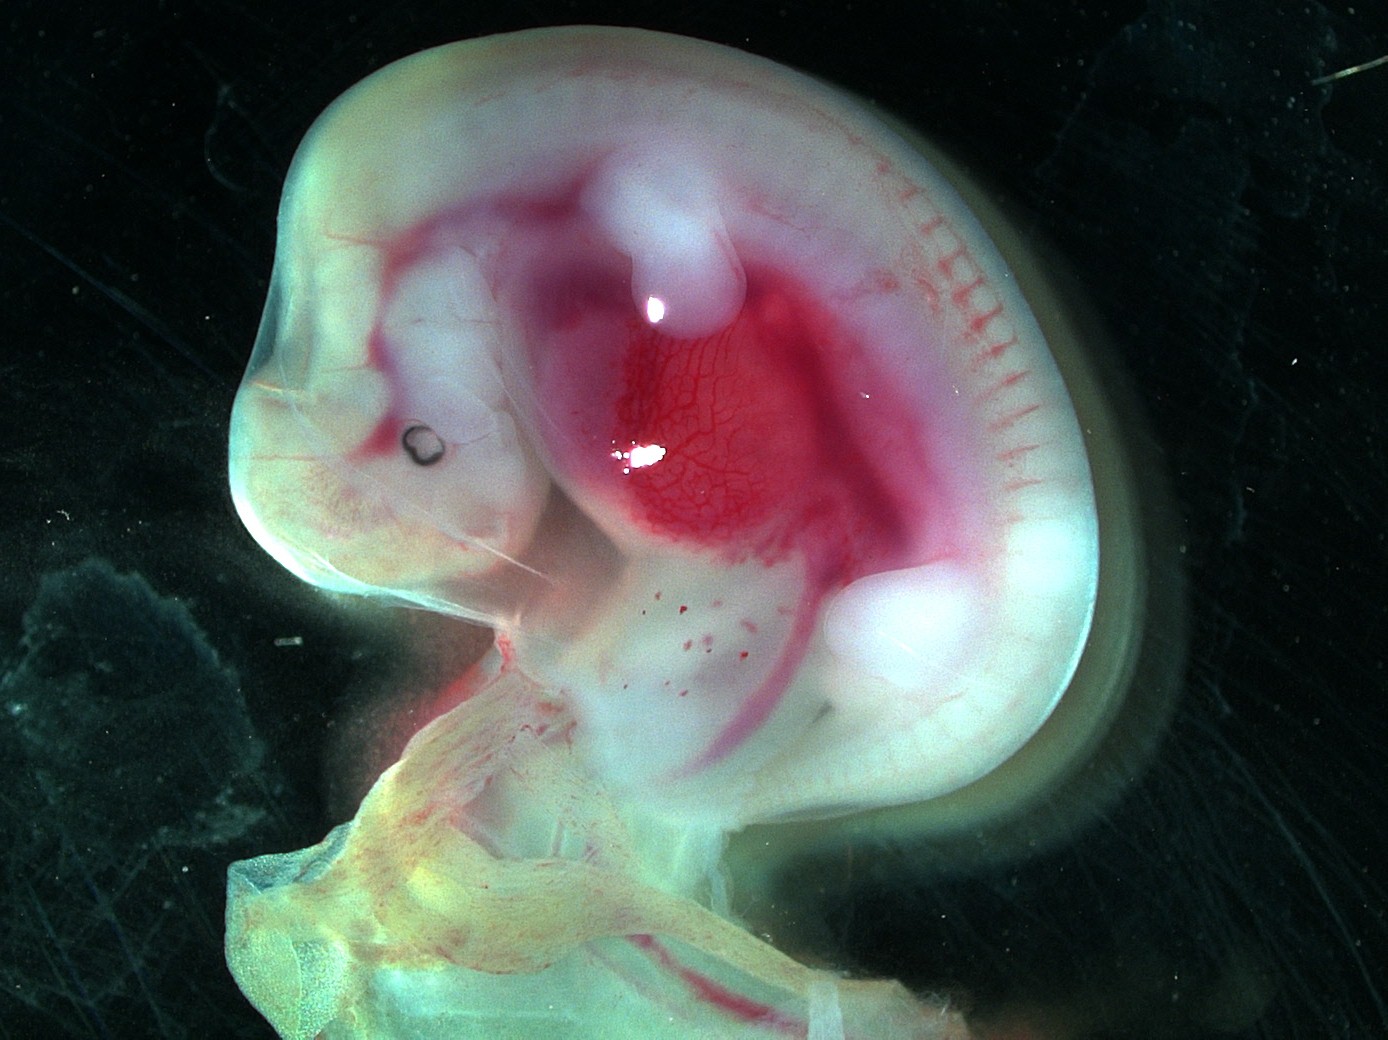 This is what a viable embryo looks like 34 days into the cow's pregnancy. (NDSU photo)